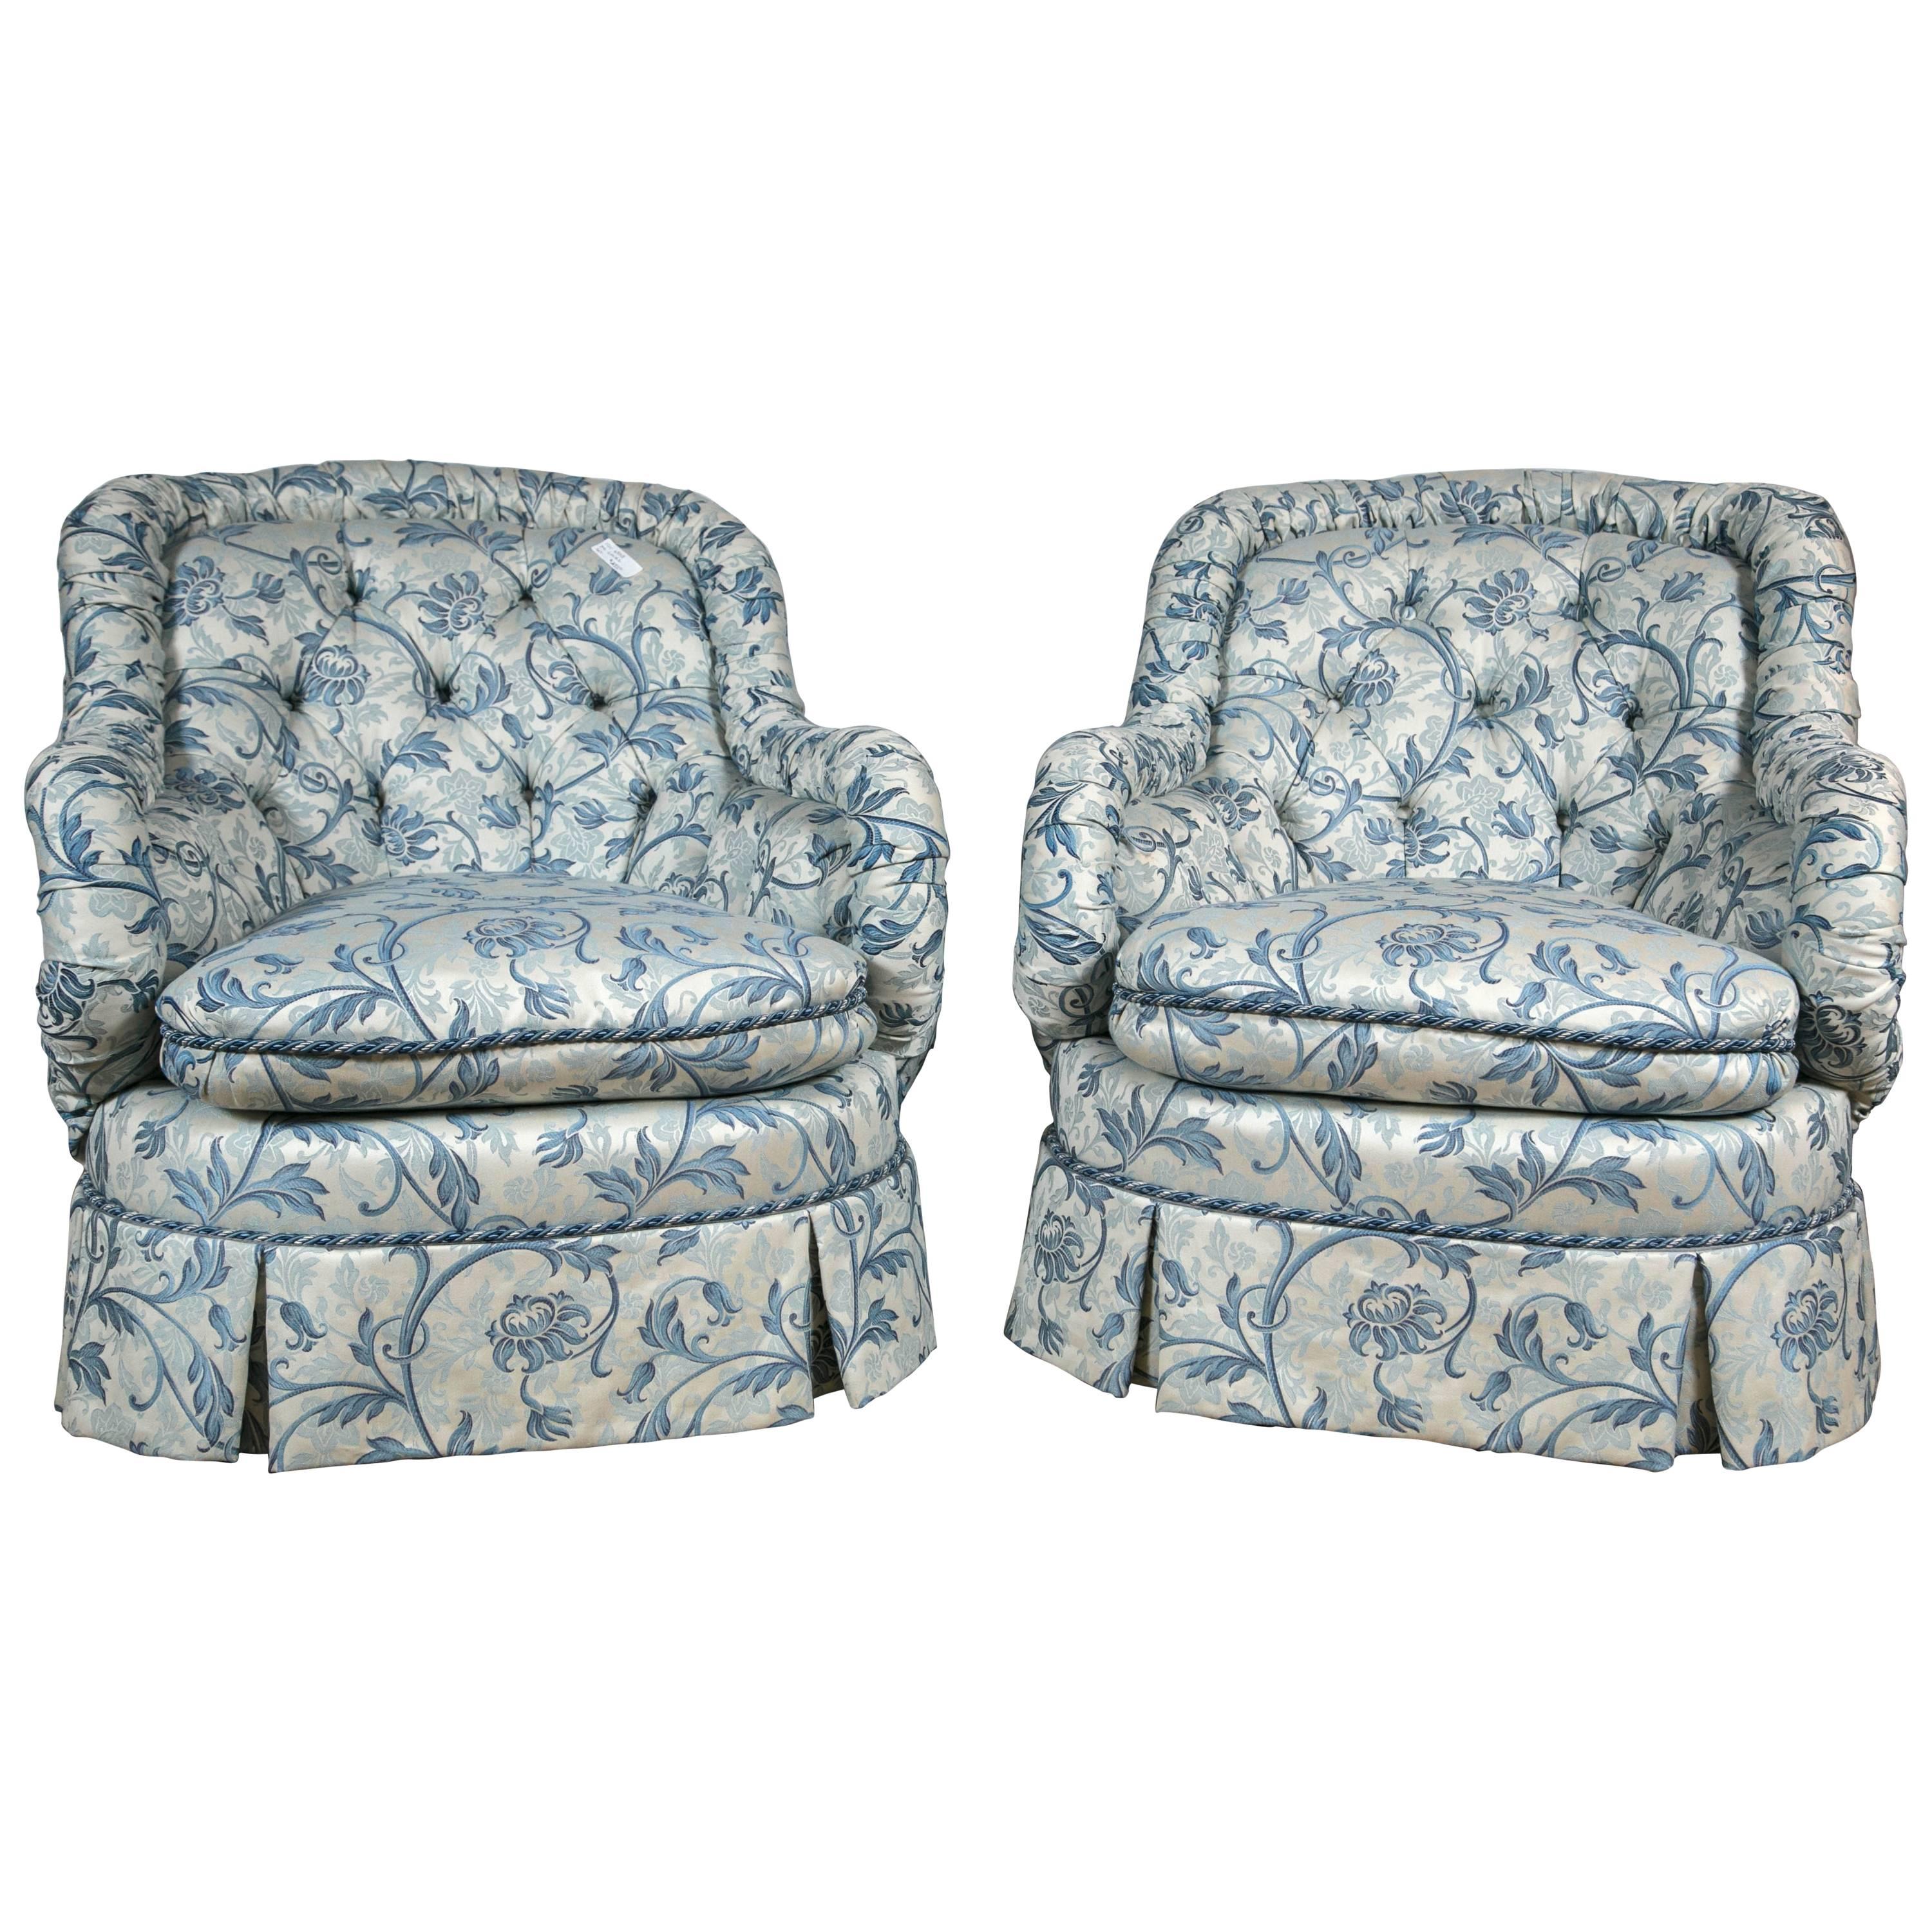 Pair of Tufted Barrel Back Chairs Custom Quality